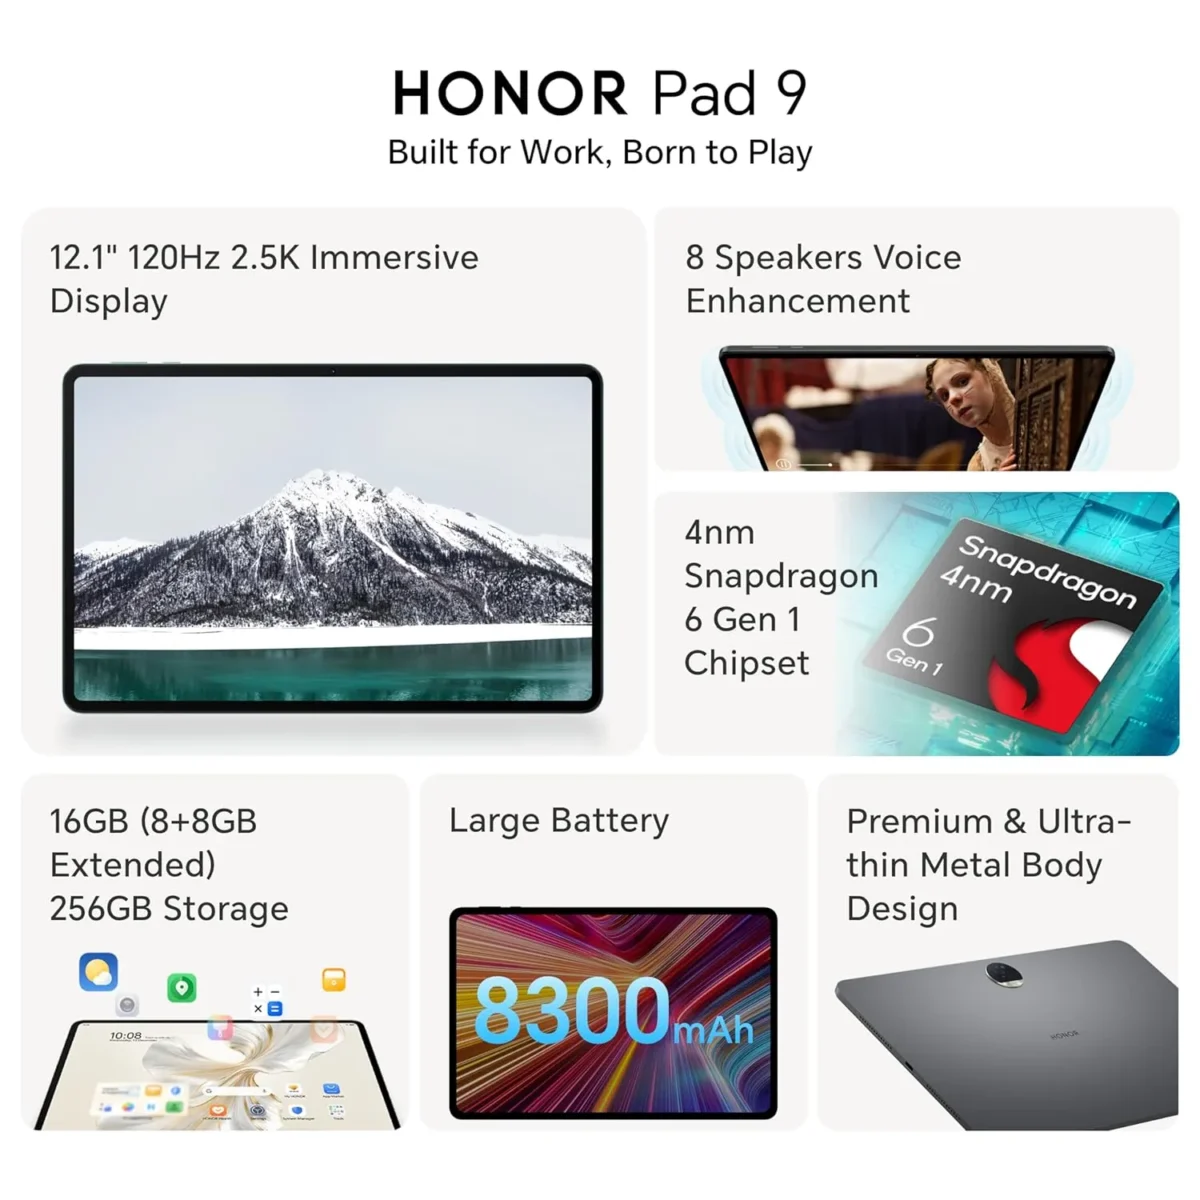 Honor Pad 9 Specifications